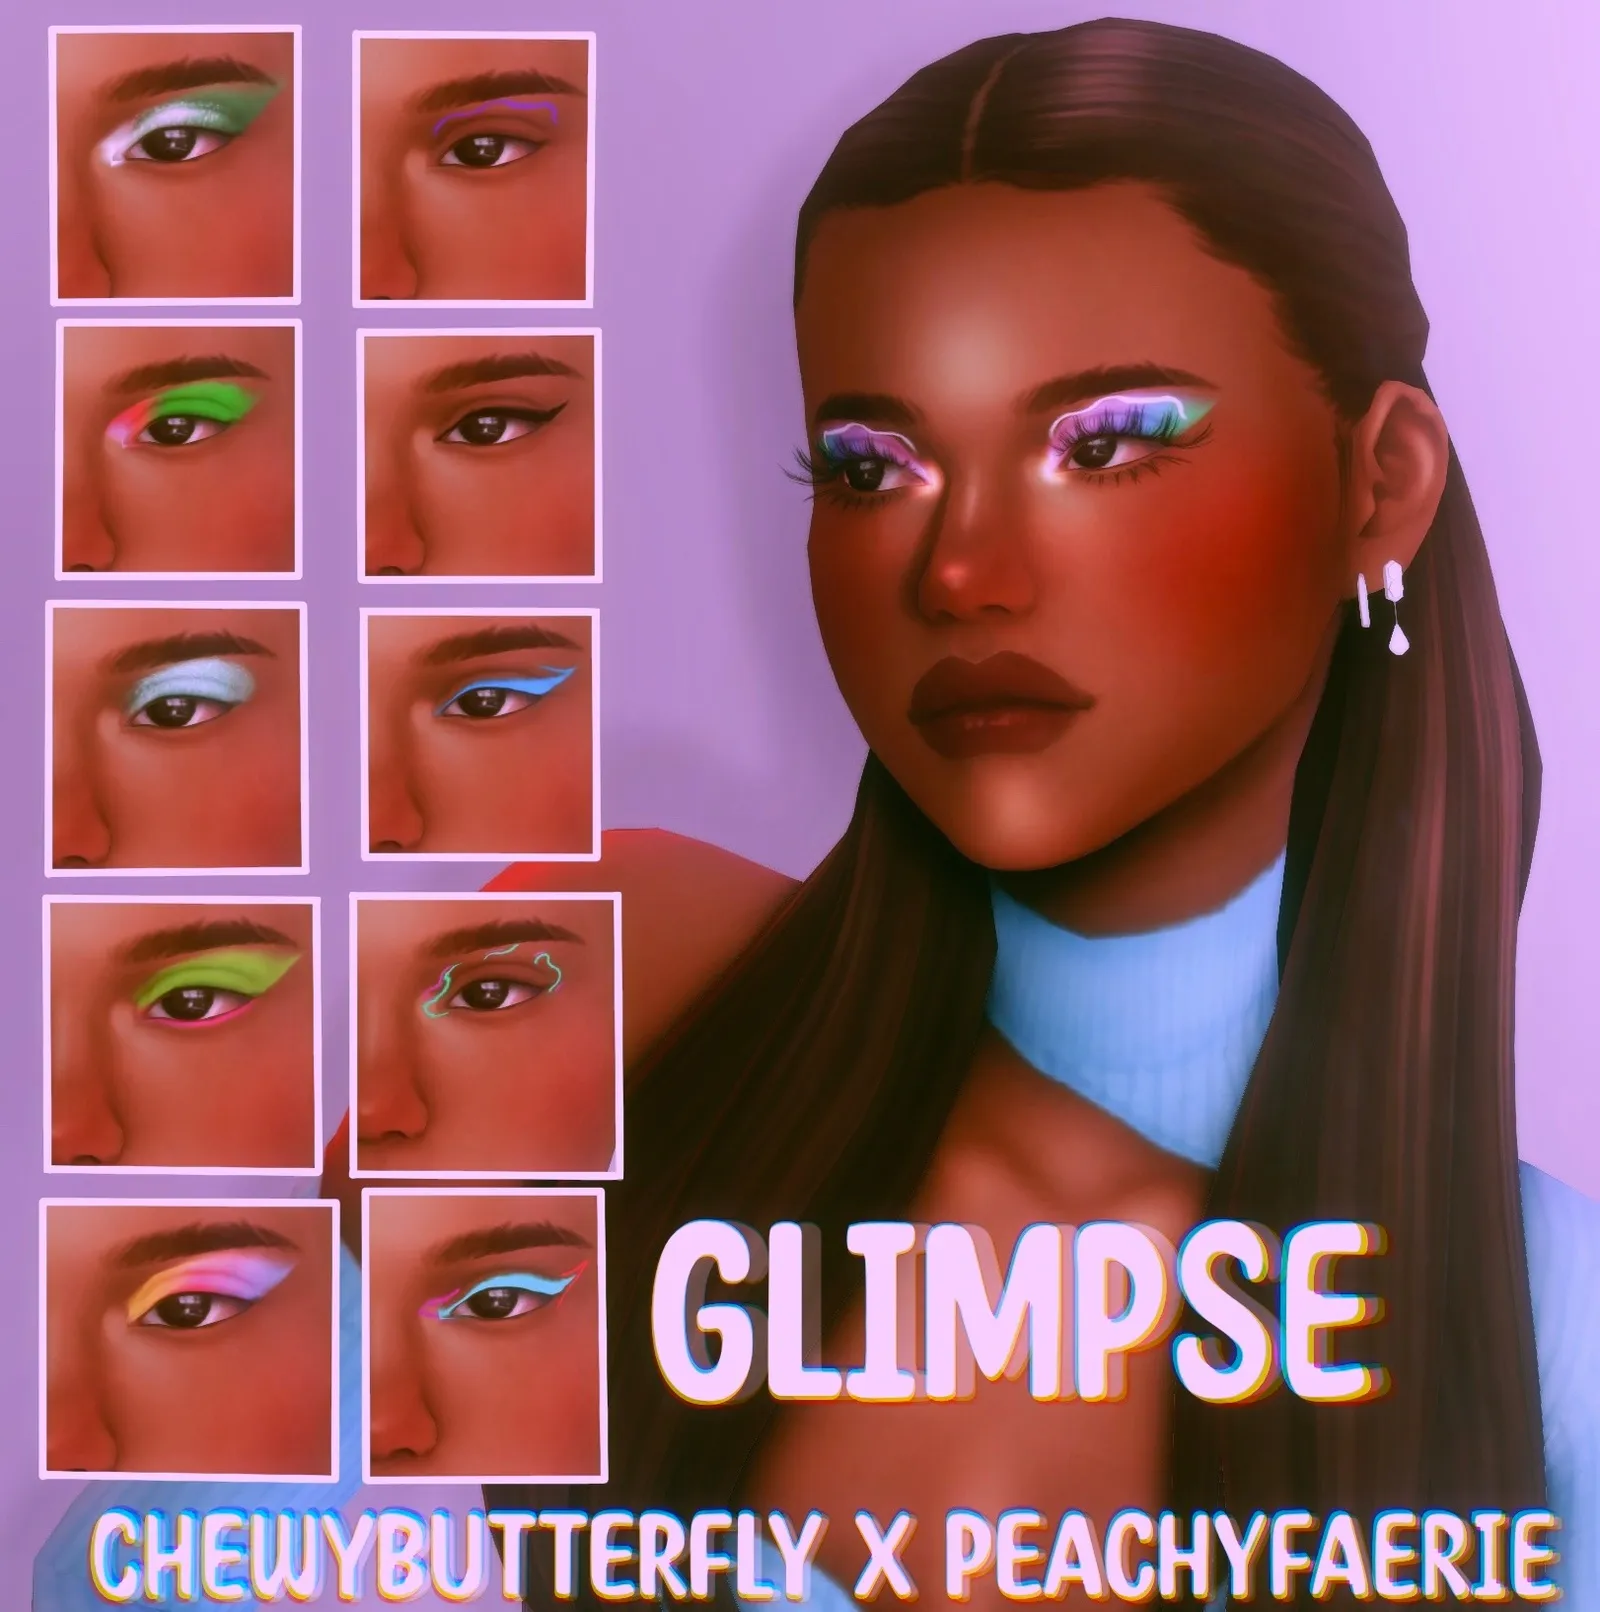 Glimpse collection / chewybutterfly x peachyfaerie